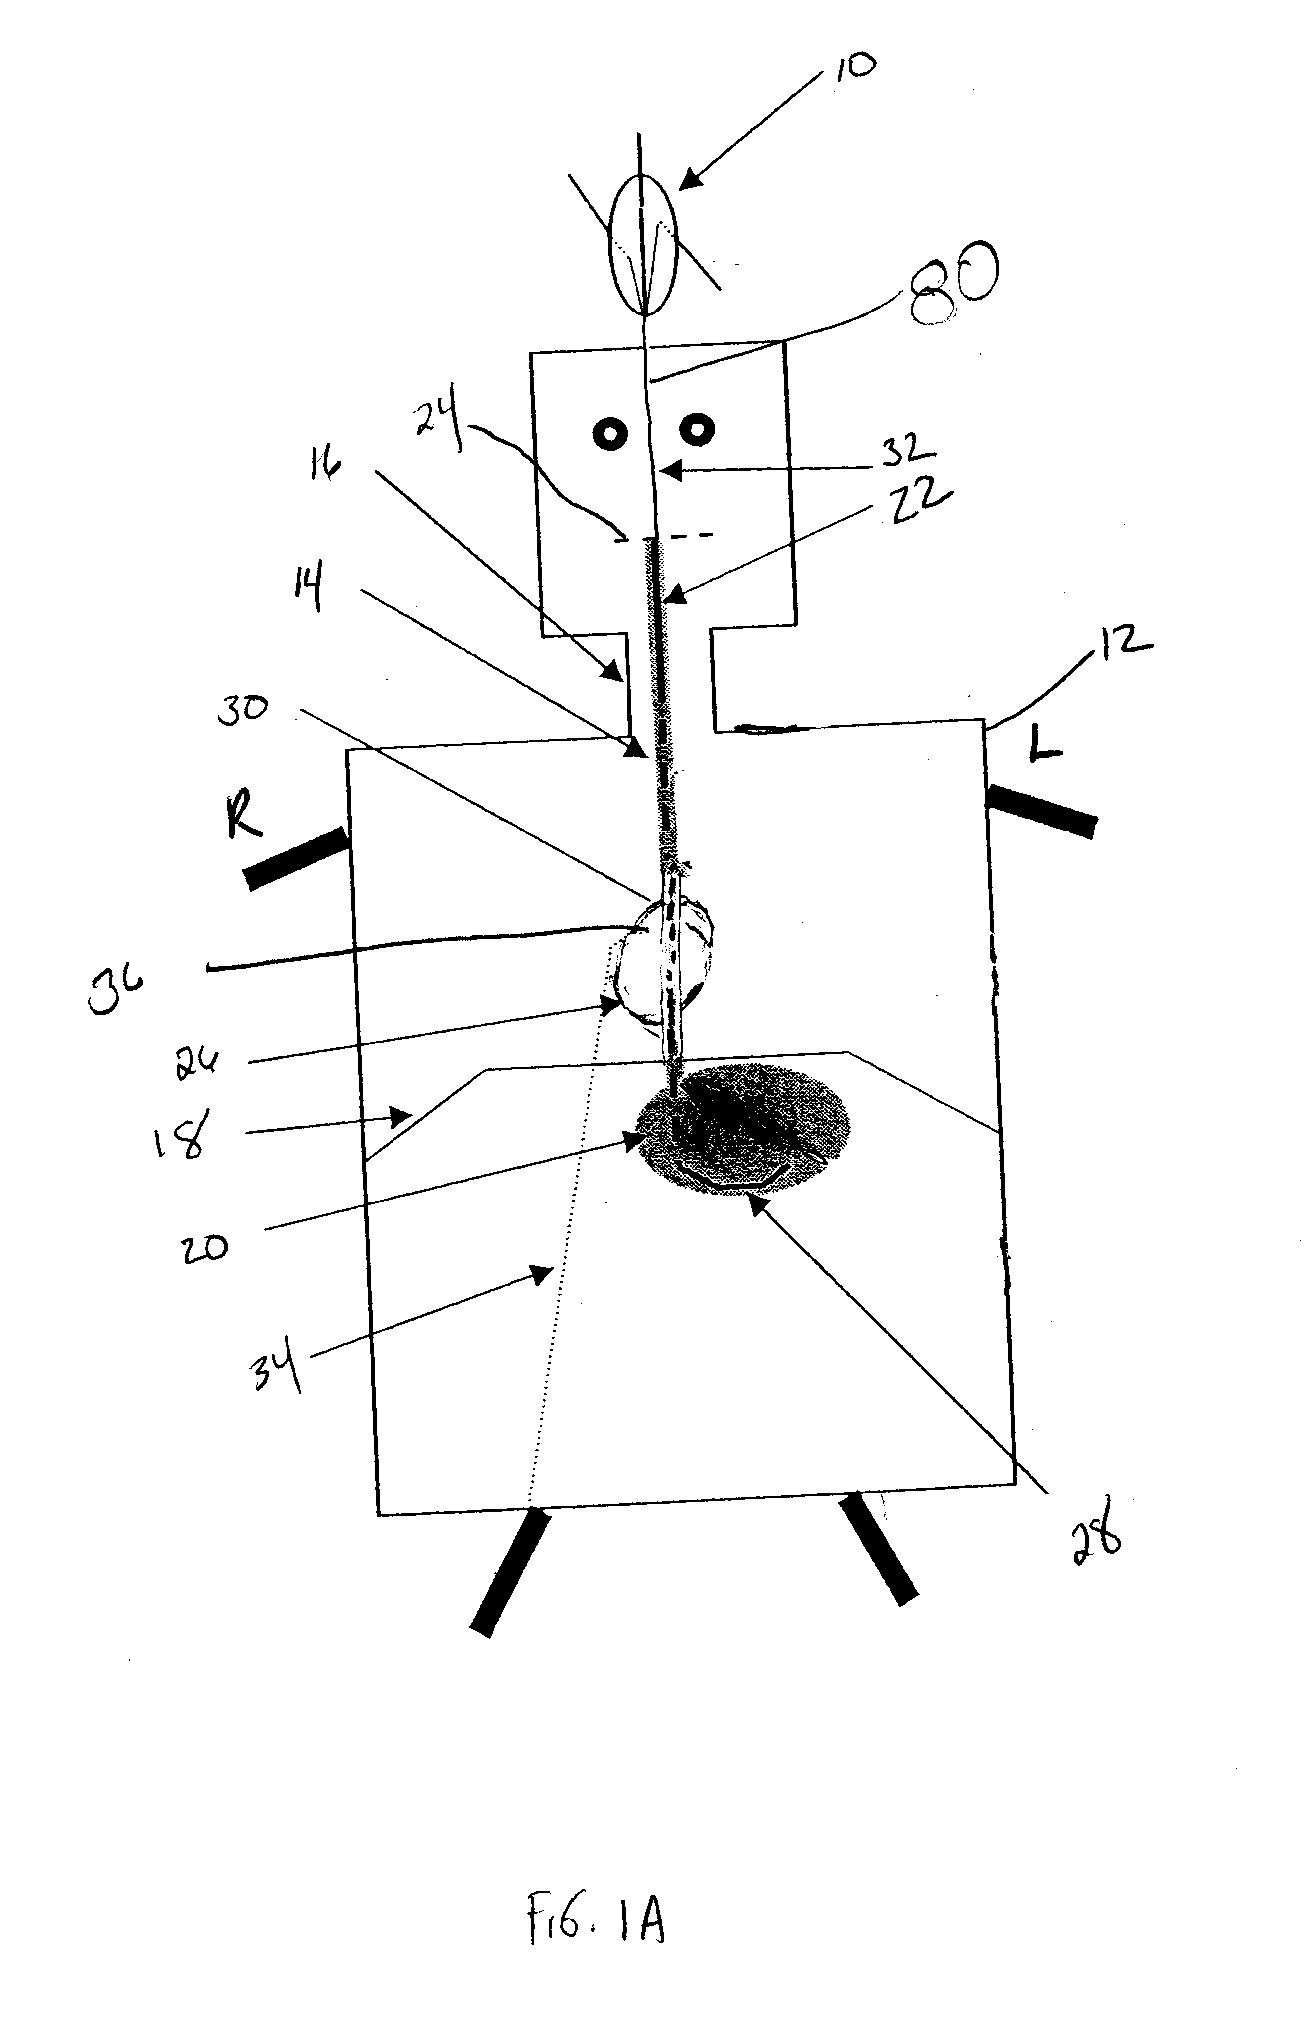 System and method for influencing an anatomical structure